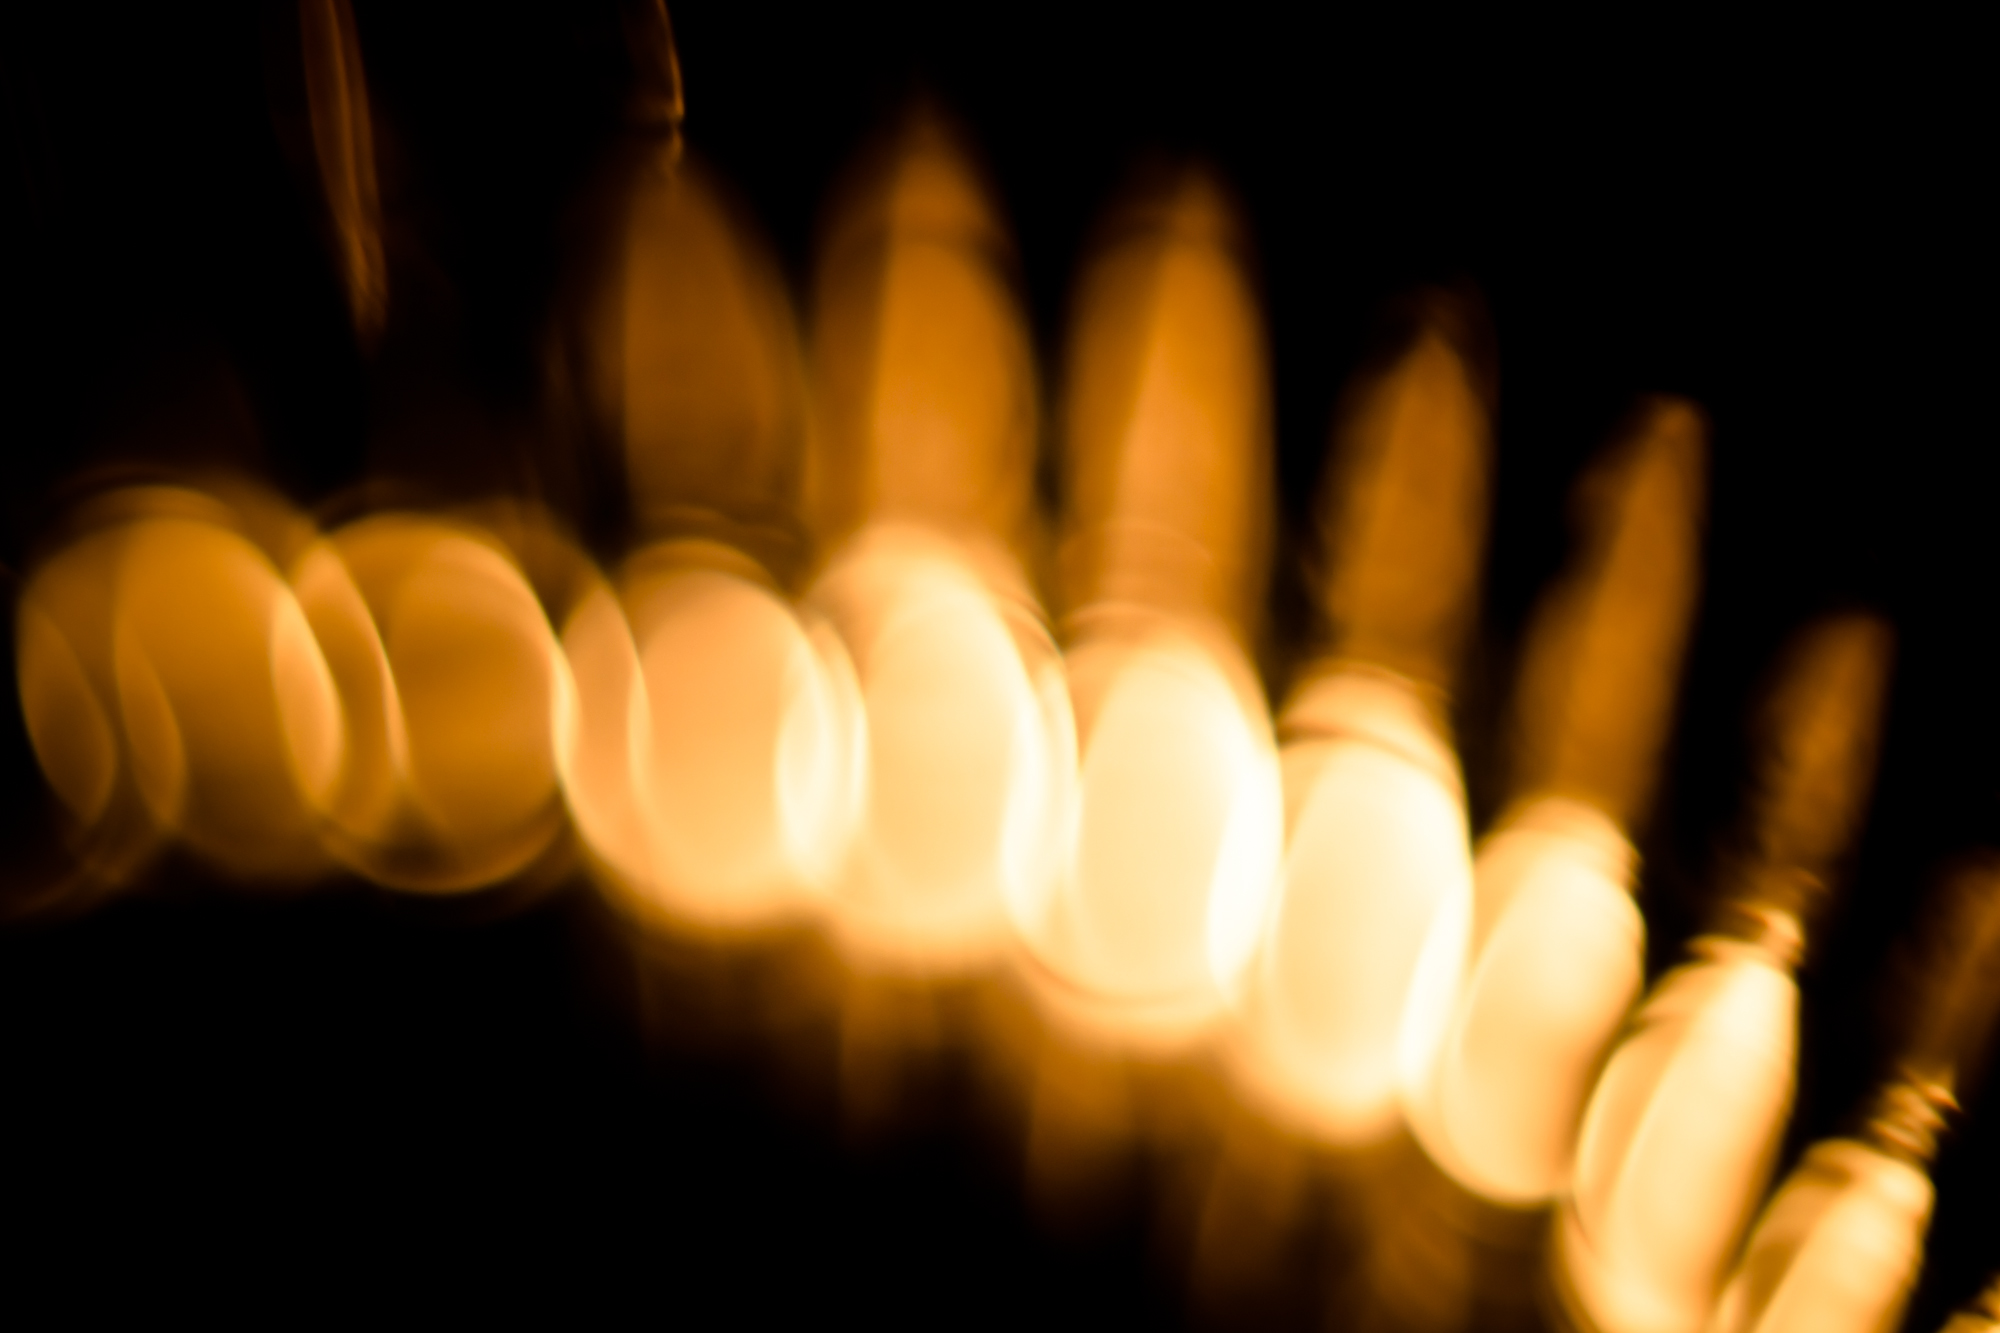 blurry image of candles with long exposure